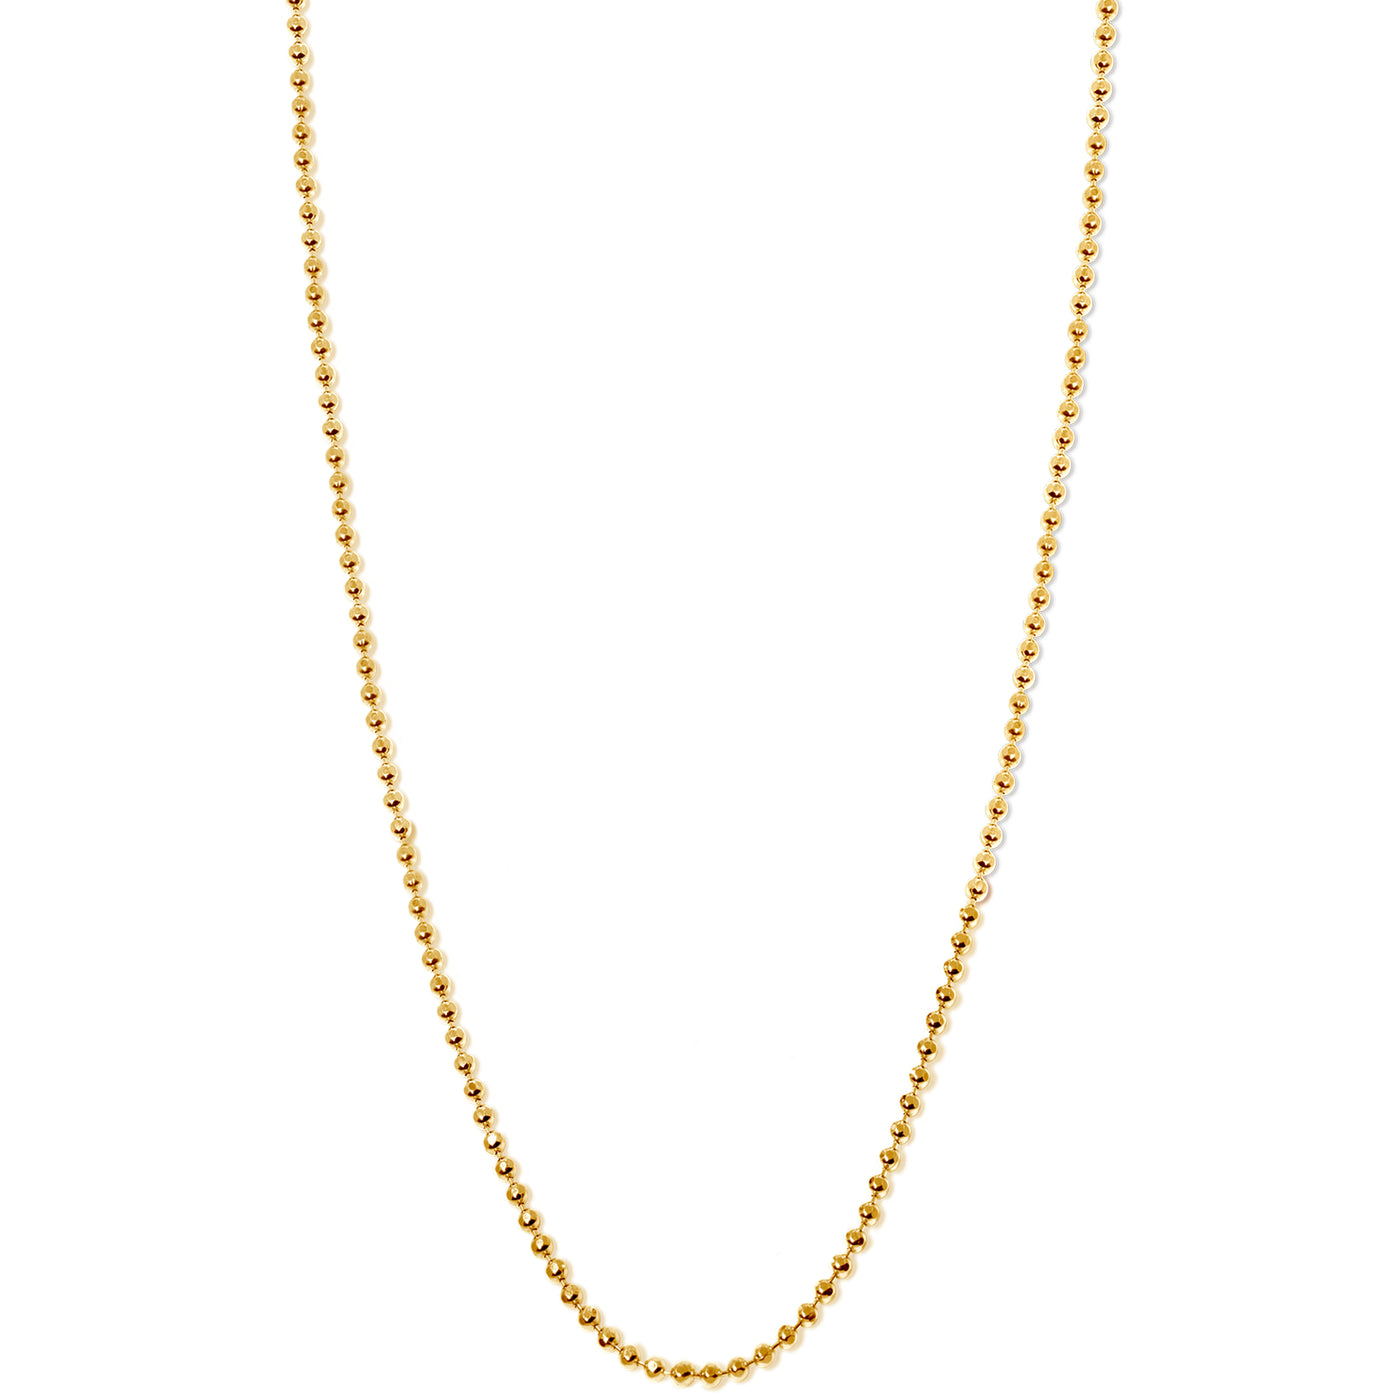 Disco Chain in 18kt Gold - 1 mm